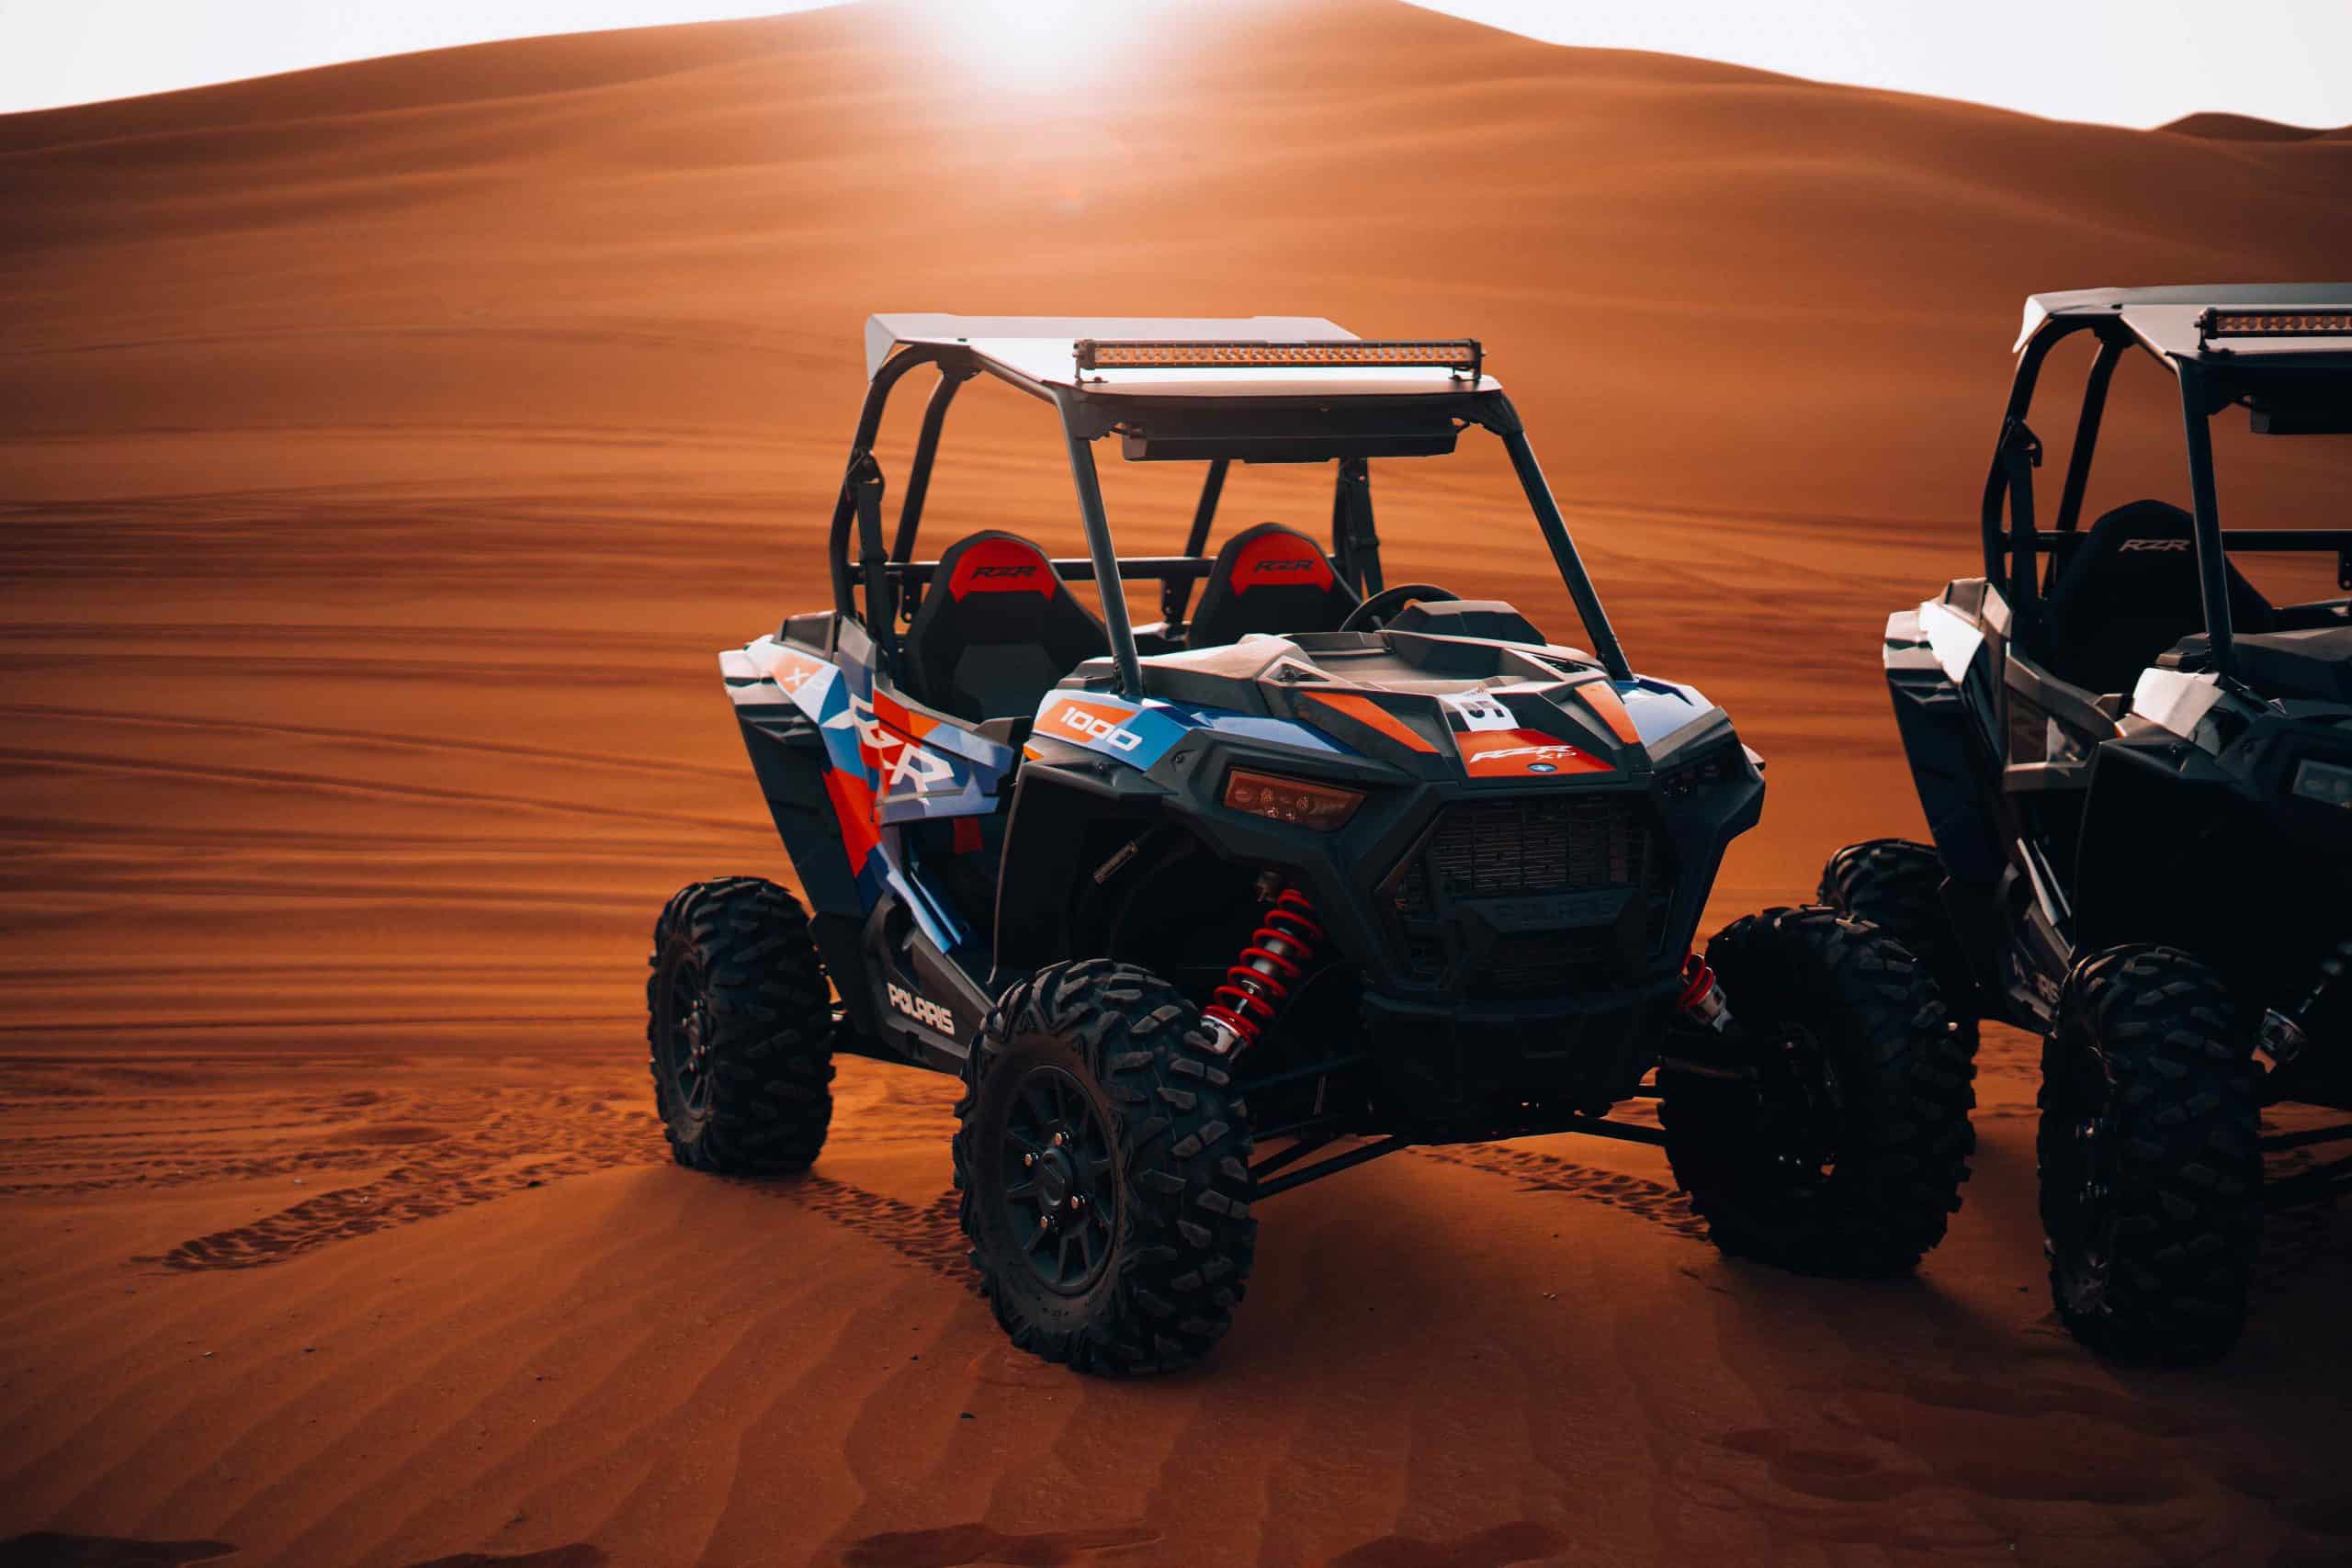 How Much Is A Dune Buggy In The UAE?